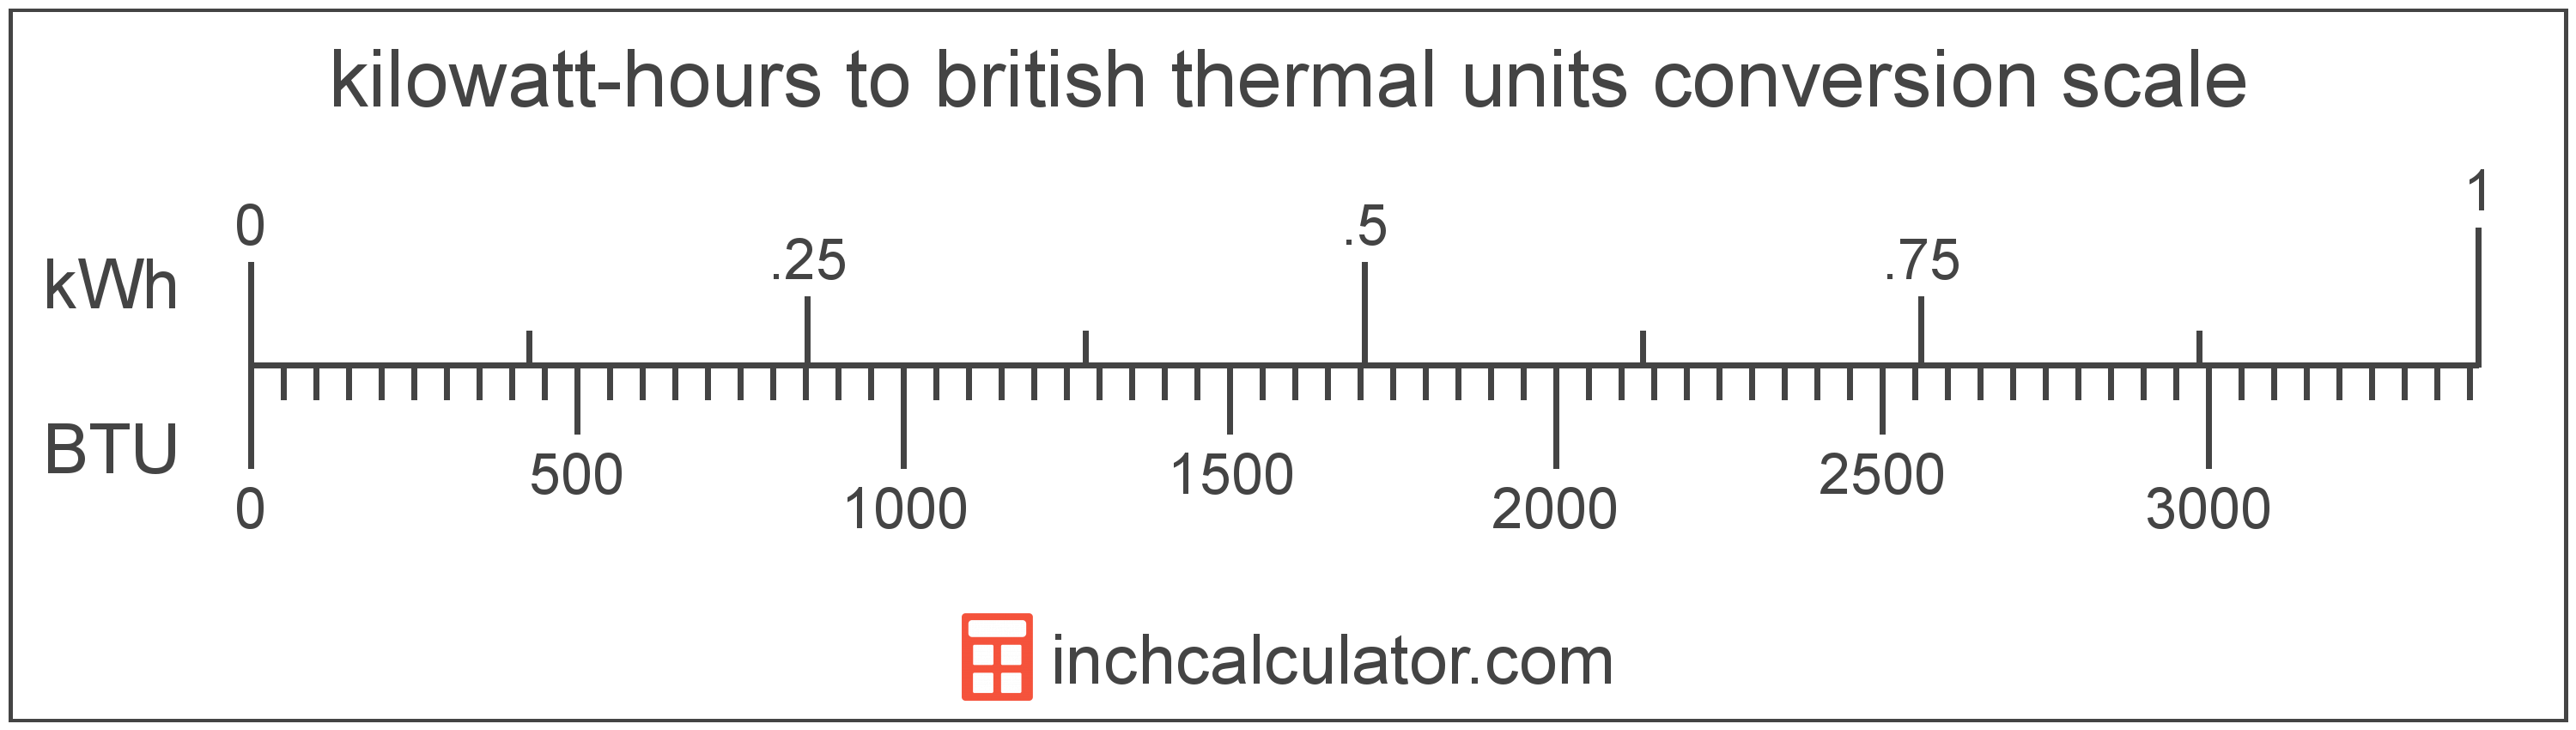 conversion scale showing kilowatt-hours and equivalent british thermal units energy values